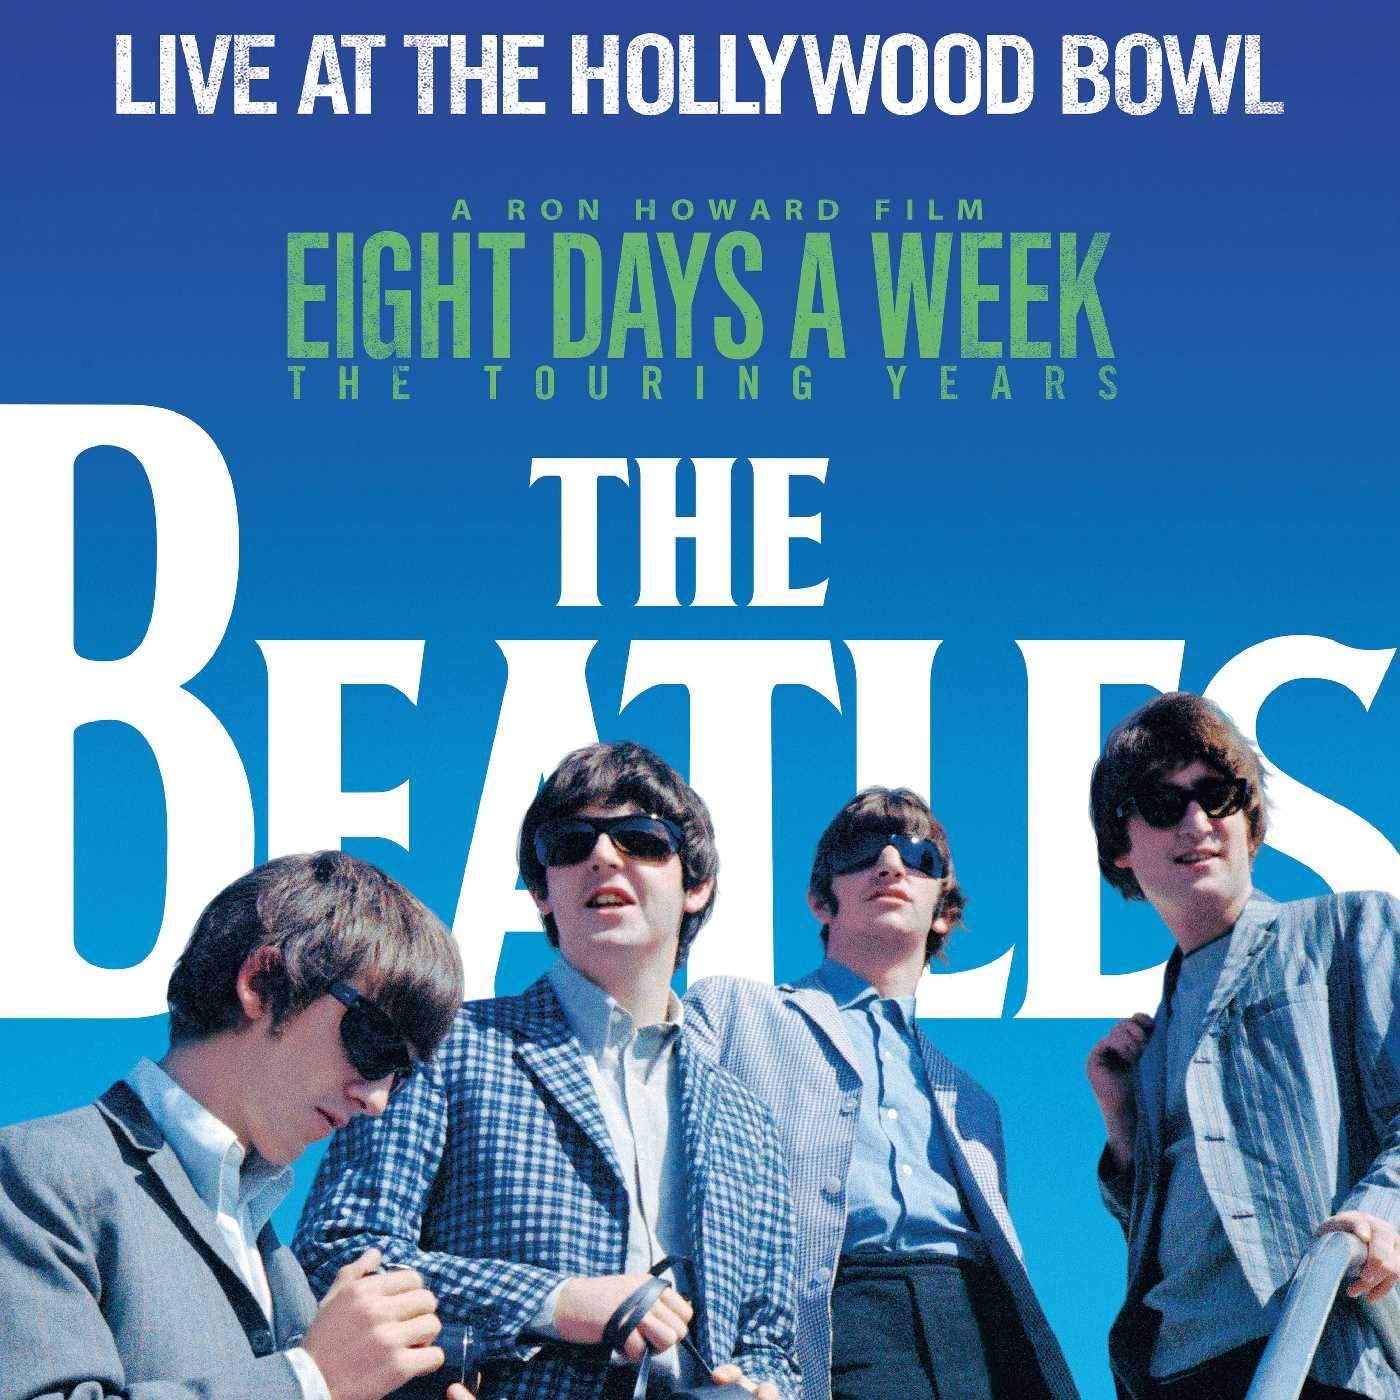 The Beatles - The Beatles: Live At The Hollywood Bowl